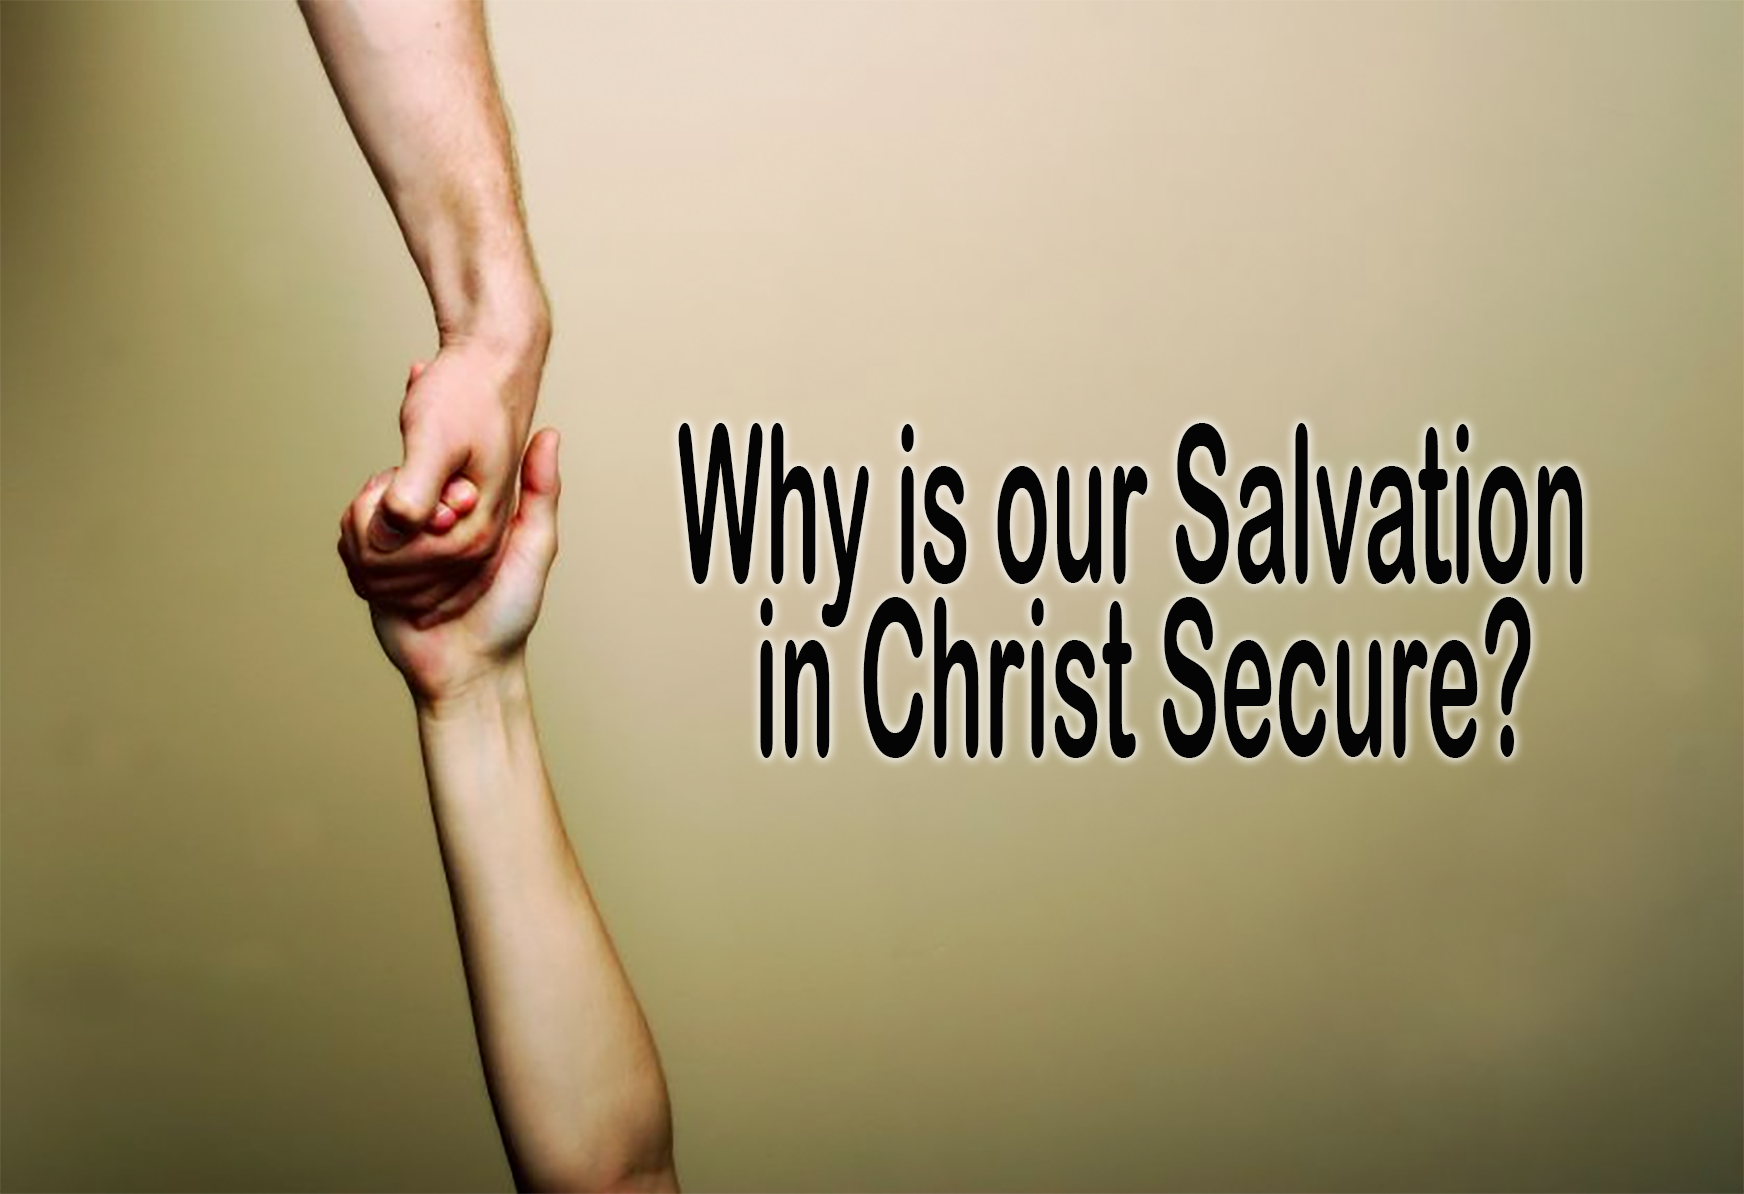 9.10.17 Why Our Salvation is Secure in Christ